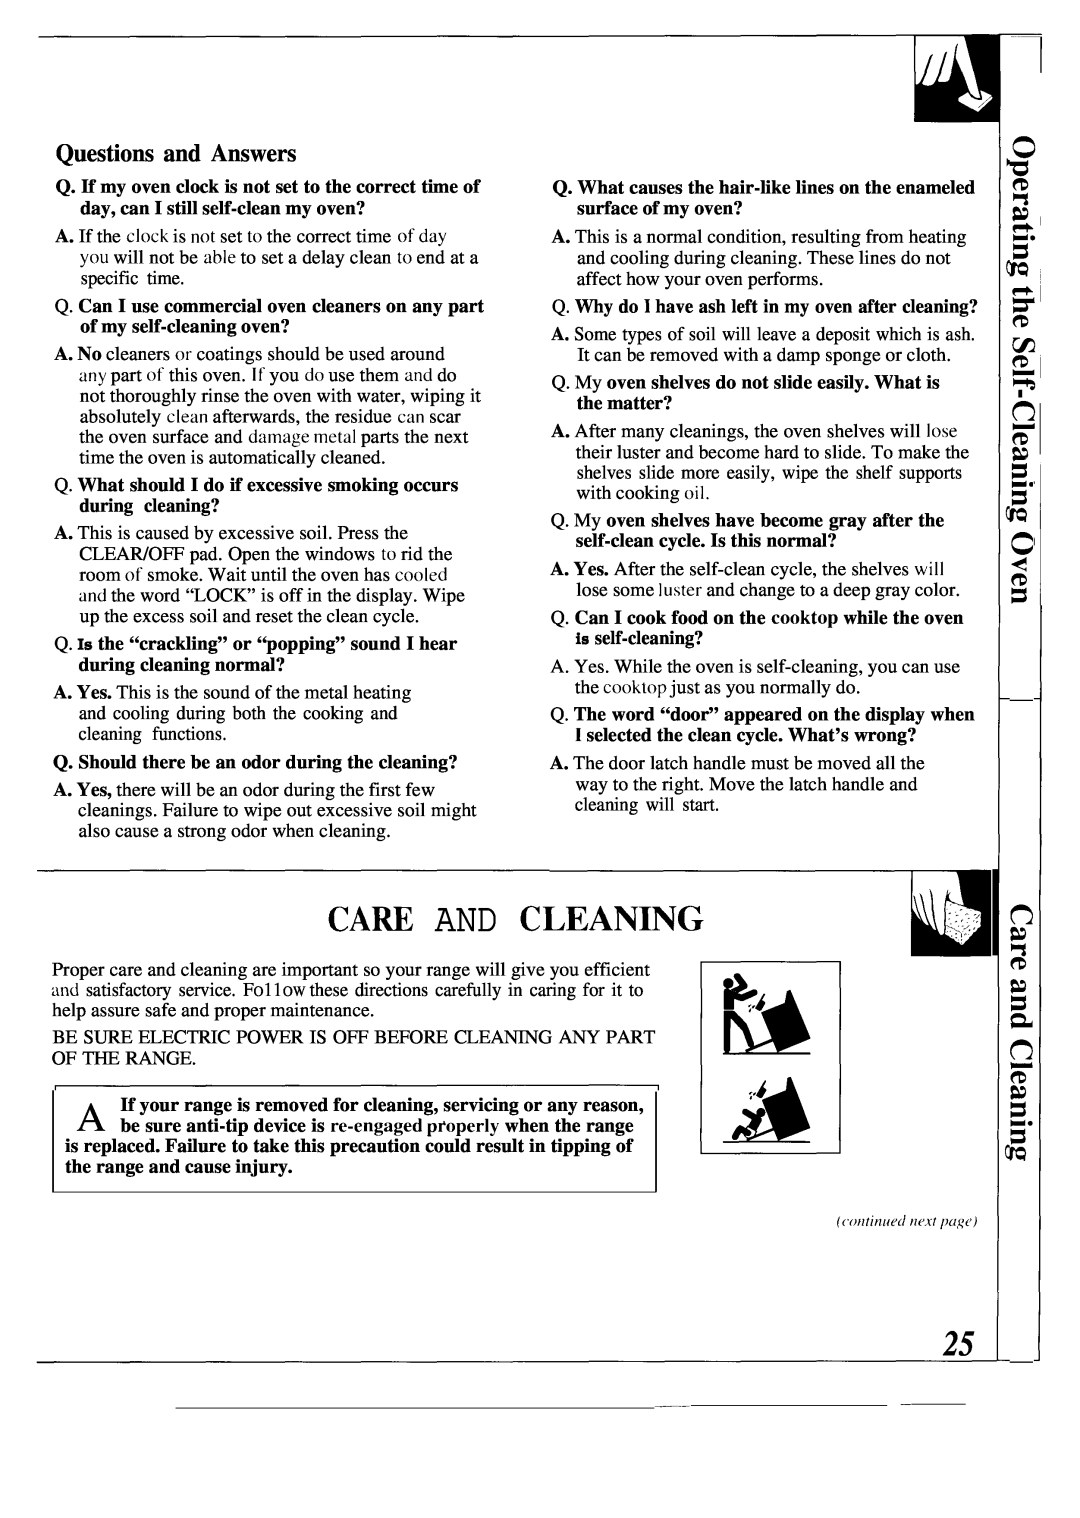 GE JBP56, JBP55 CAm AND C, Questions and Answers, Q. What should I do if excessive smoking occurs during cleaning? 